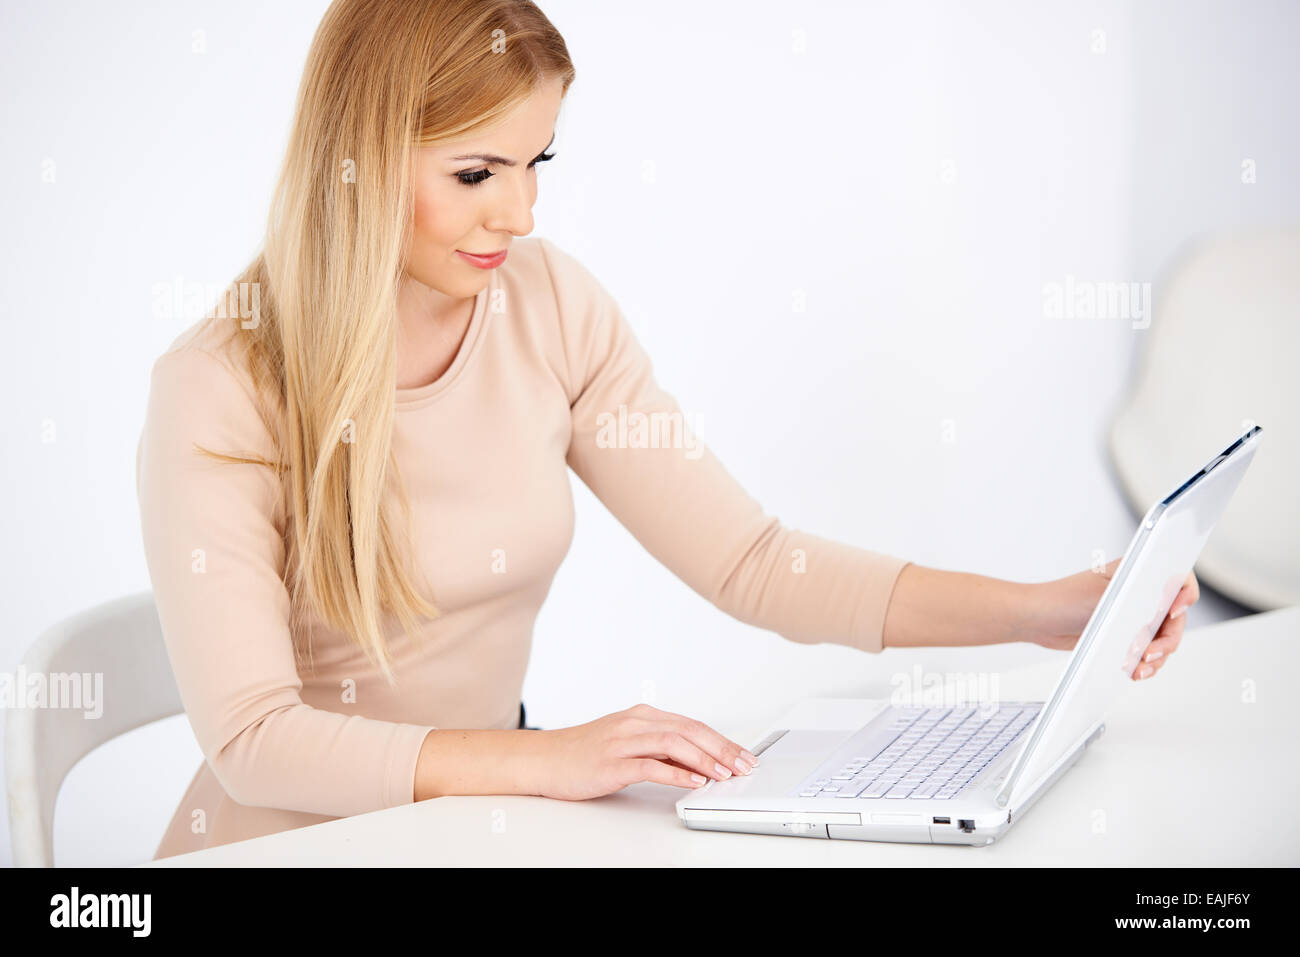 Attractive blonde woman working on a laptop Banque D'Images